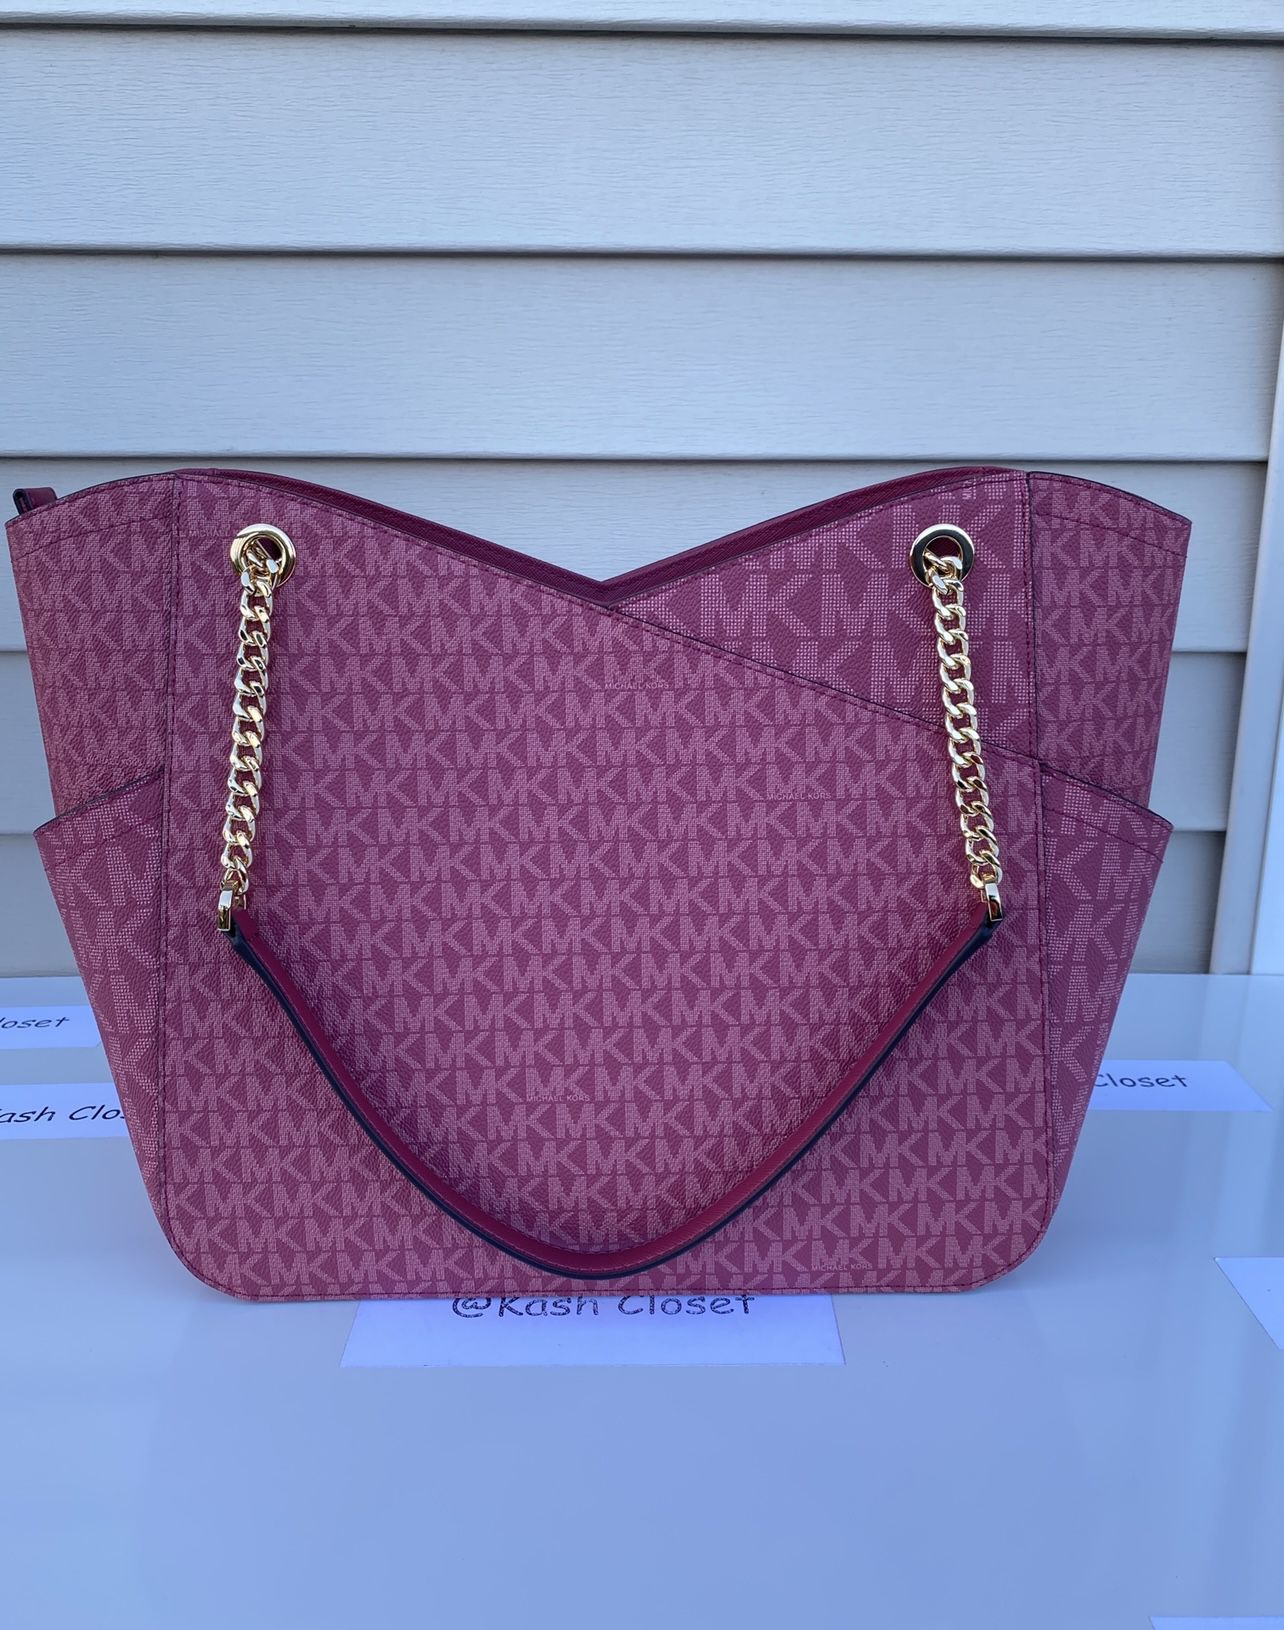 Michael Kors Jet Set Travel Large Chain Shoulder Tote for Sale in Merced,  CA - OfferUp